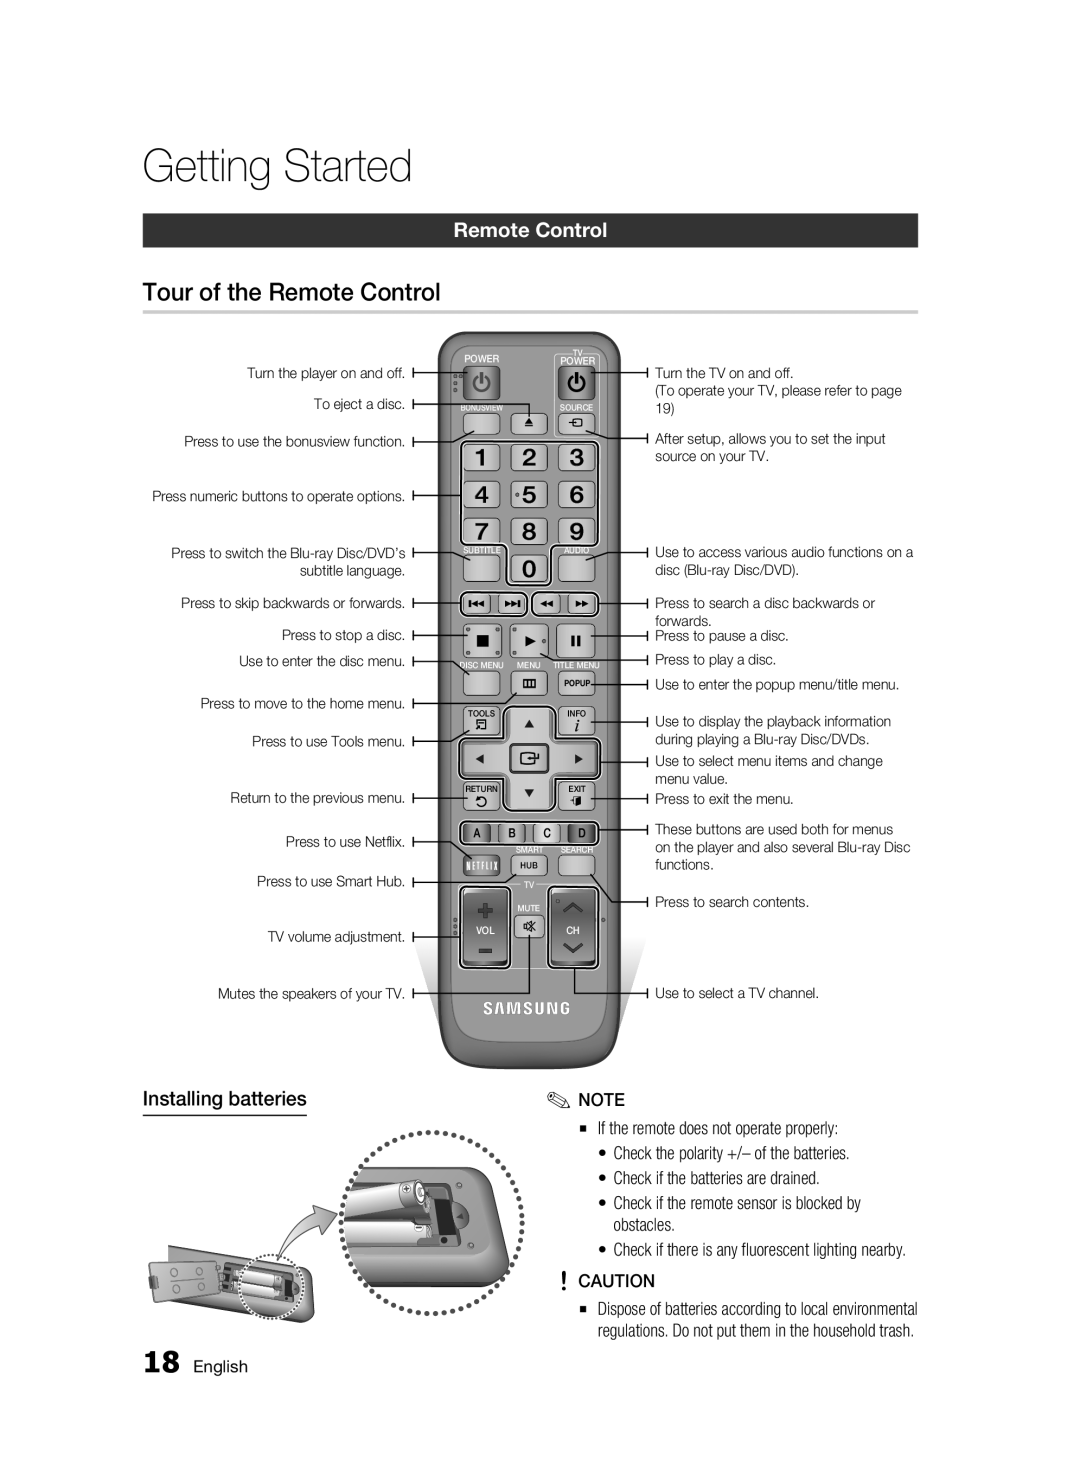 Samsung BD-D6500 Tour of the Remote Control, Installing batteries, Getting Started, English, TV volume adjustment 